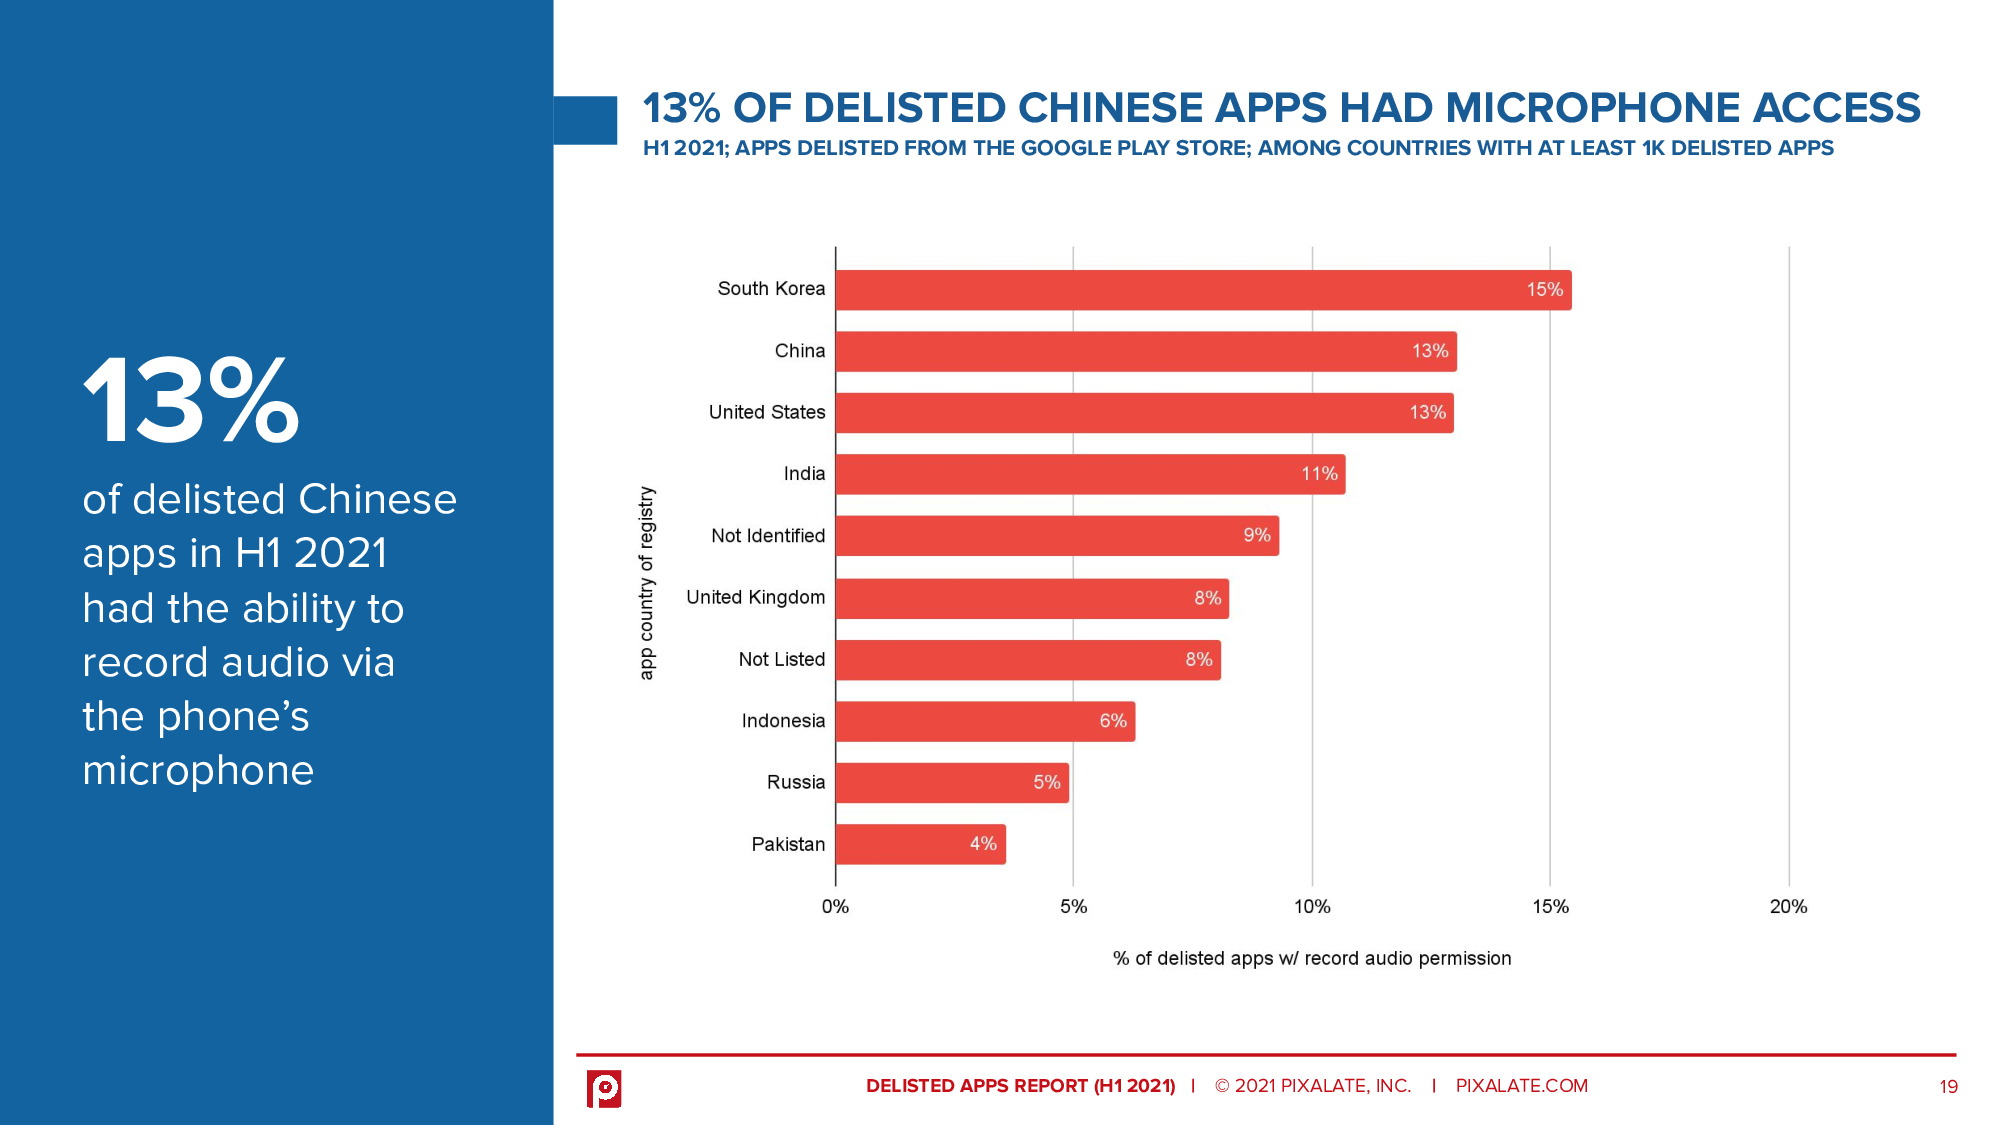 13% of delisted Chinese apps in H1 2021 had the ability to record audio via the phone’s microphone